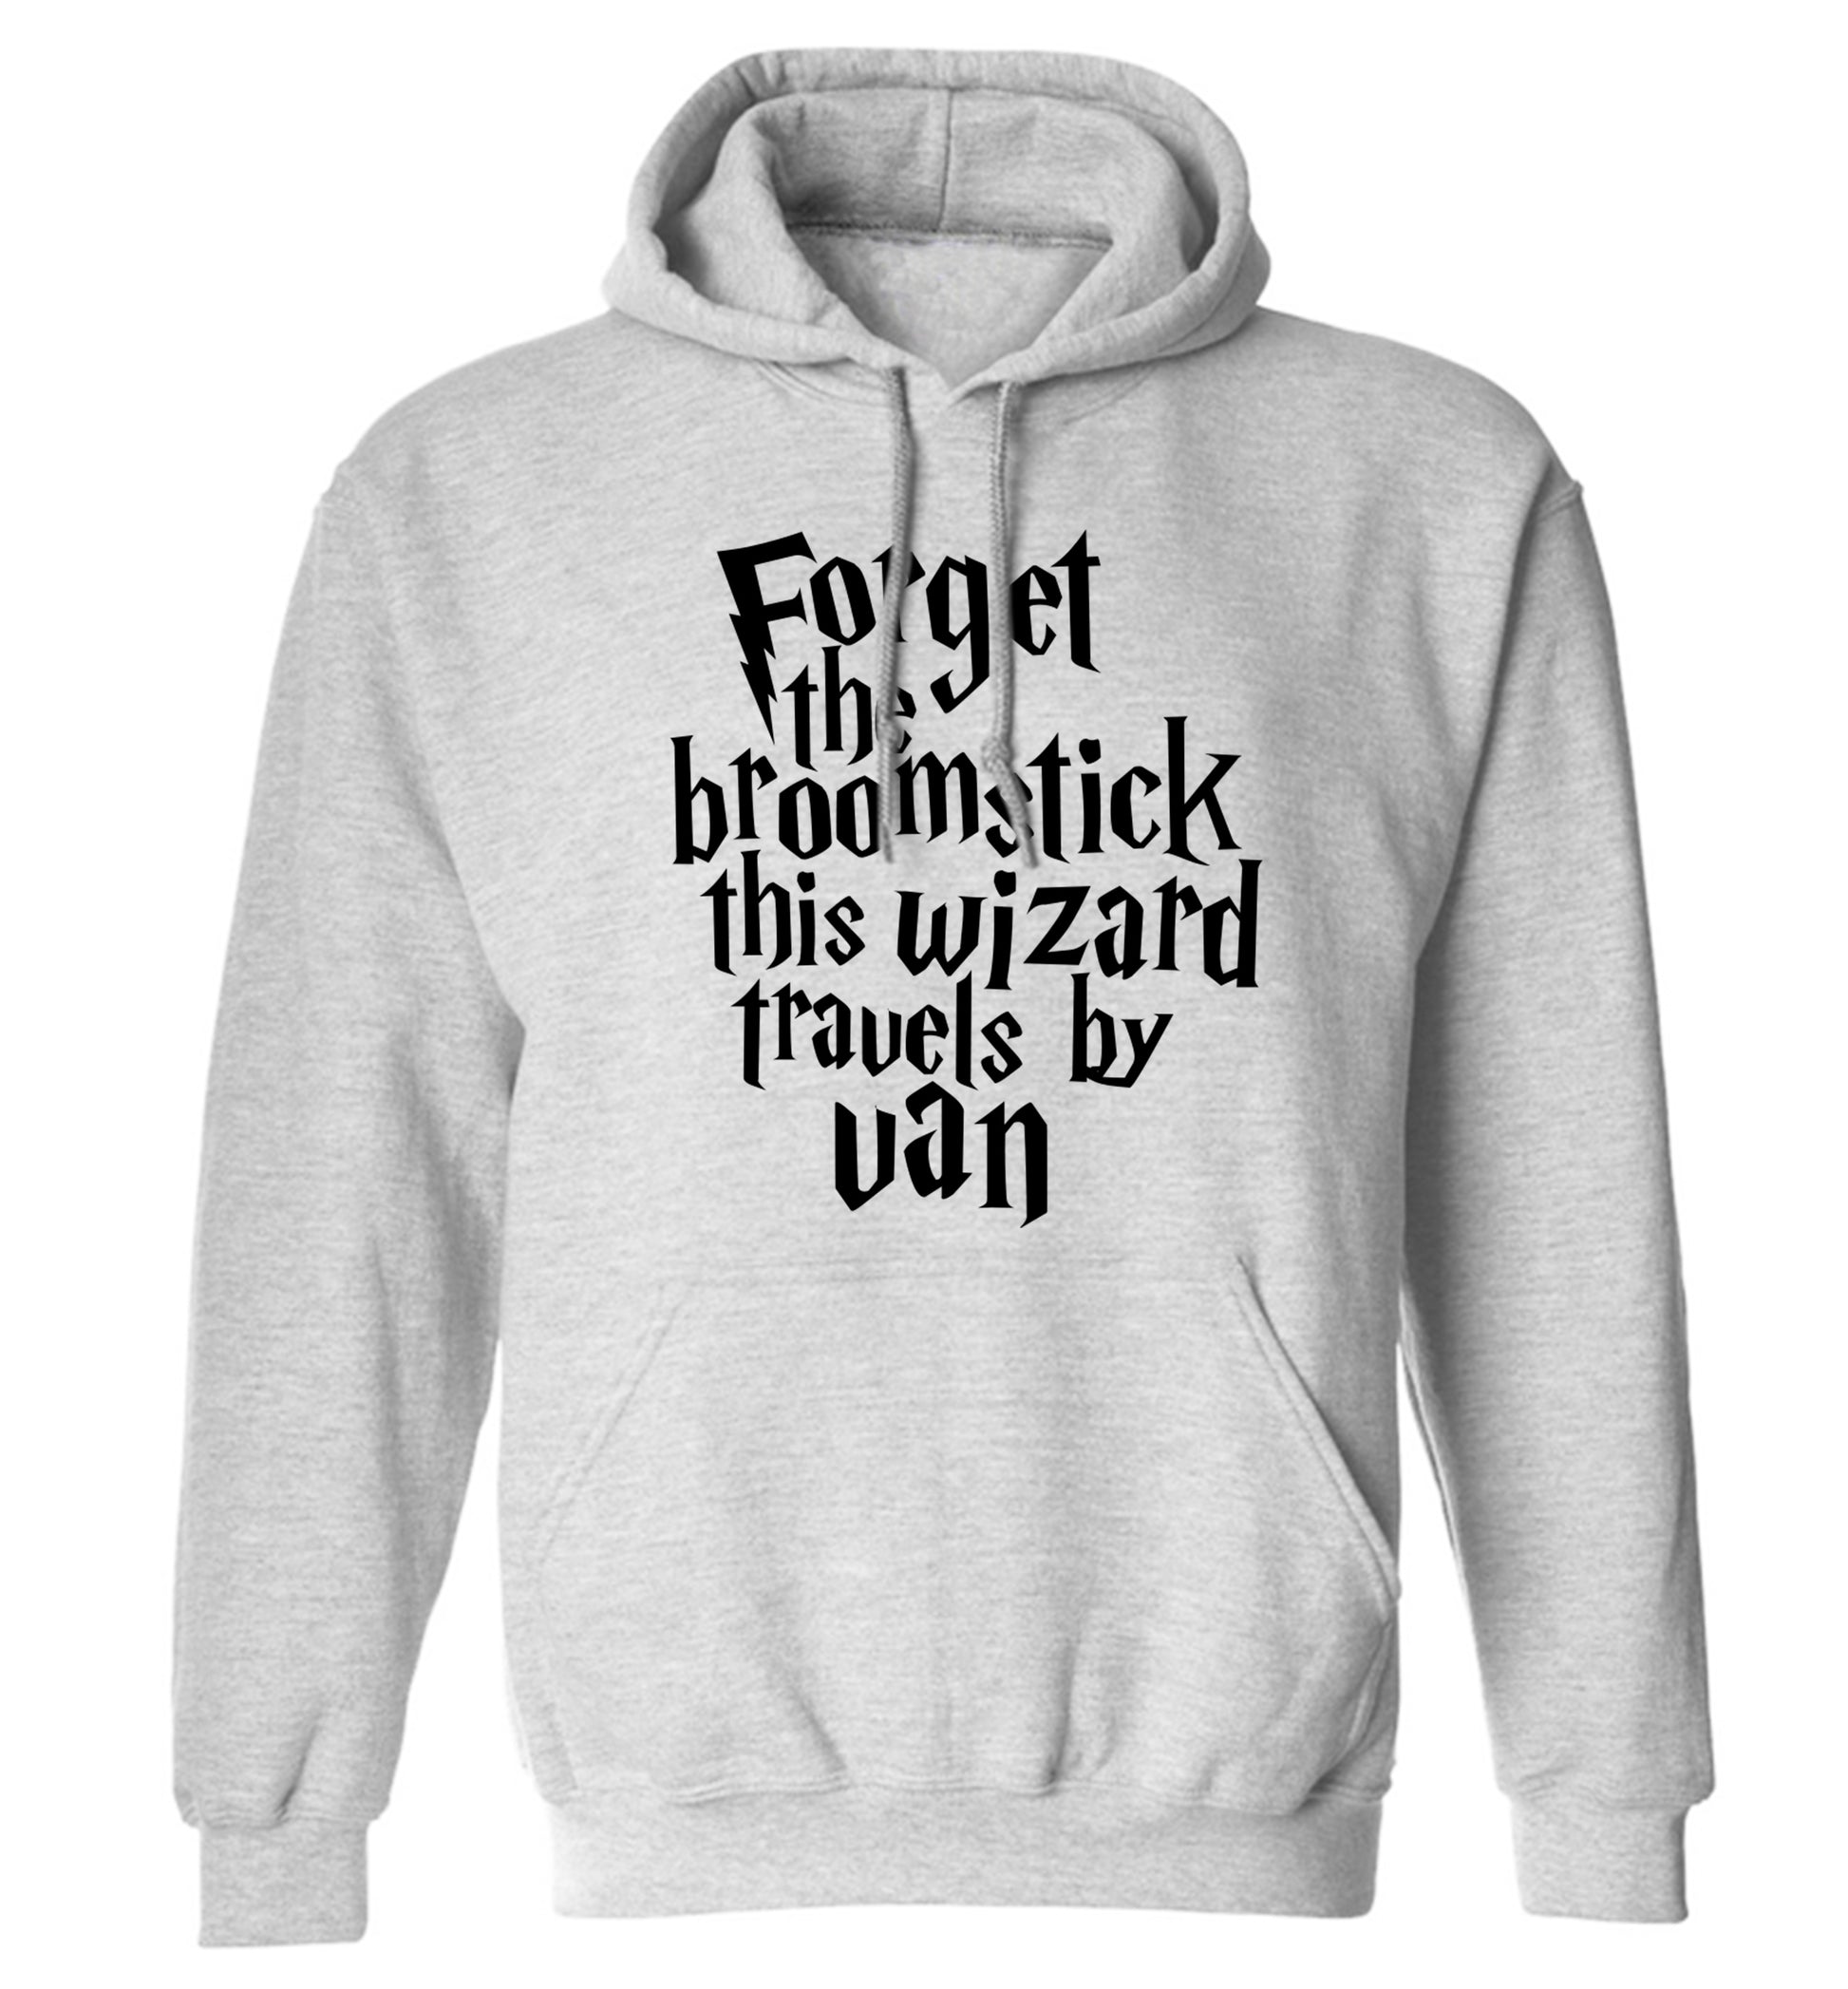 Forget the broomstick this wizard travels by van adults unisexgrey hoodie 2XL